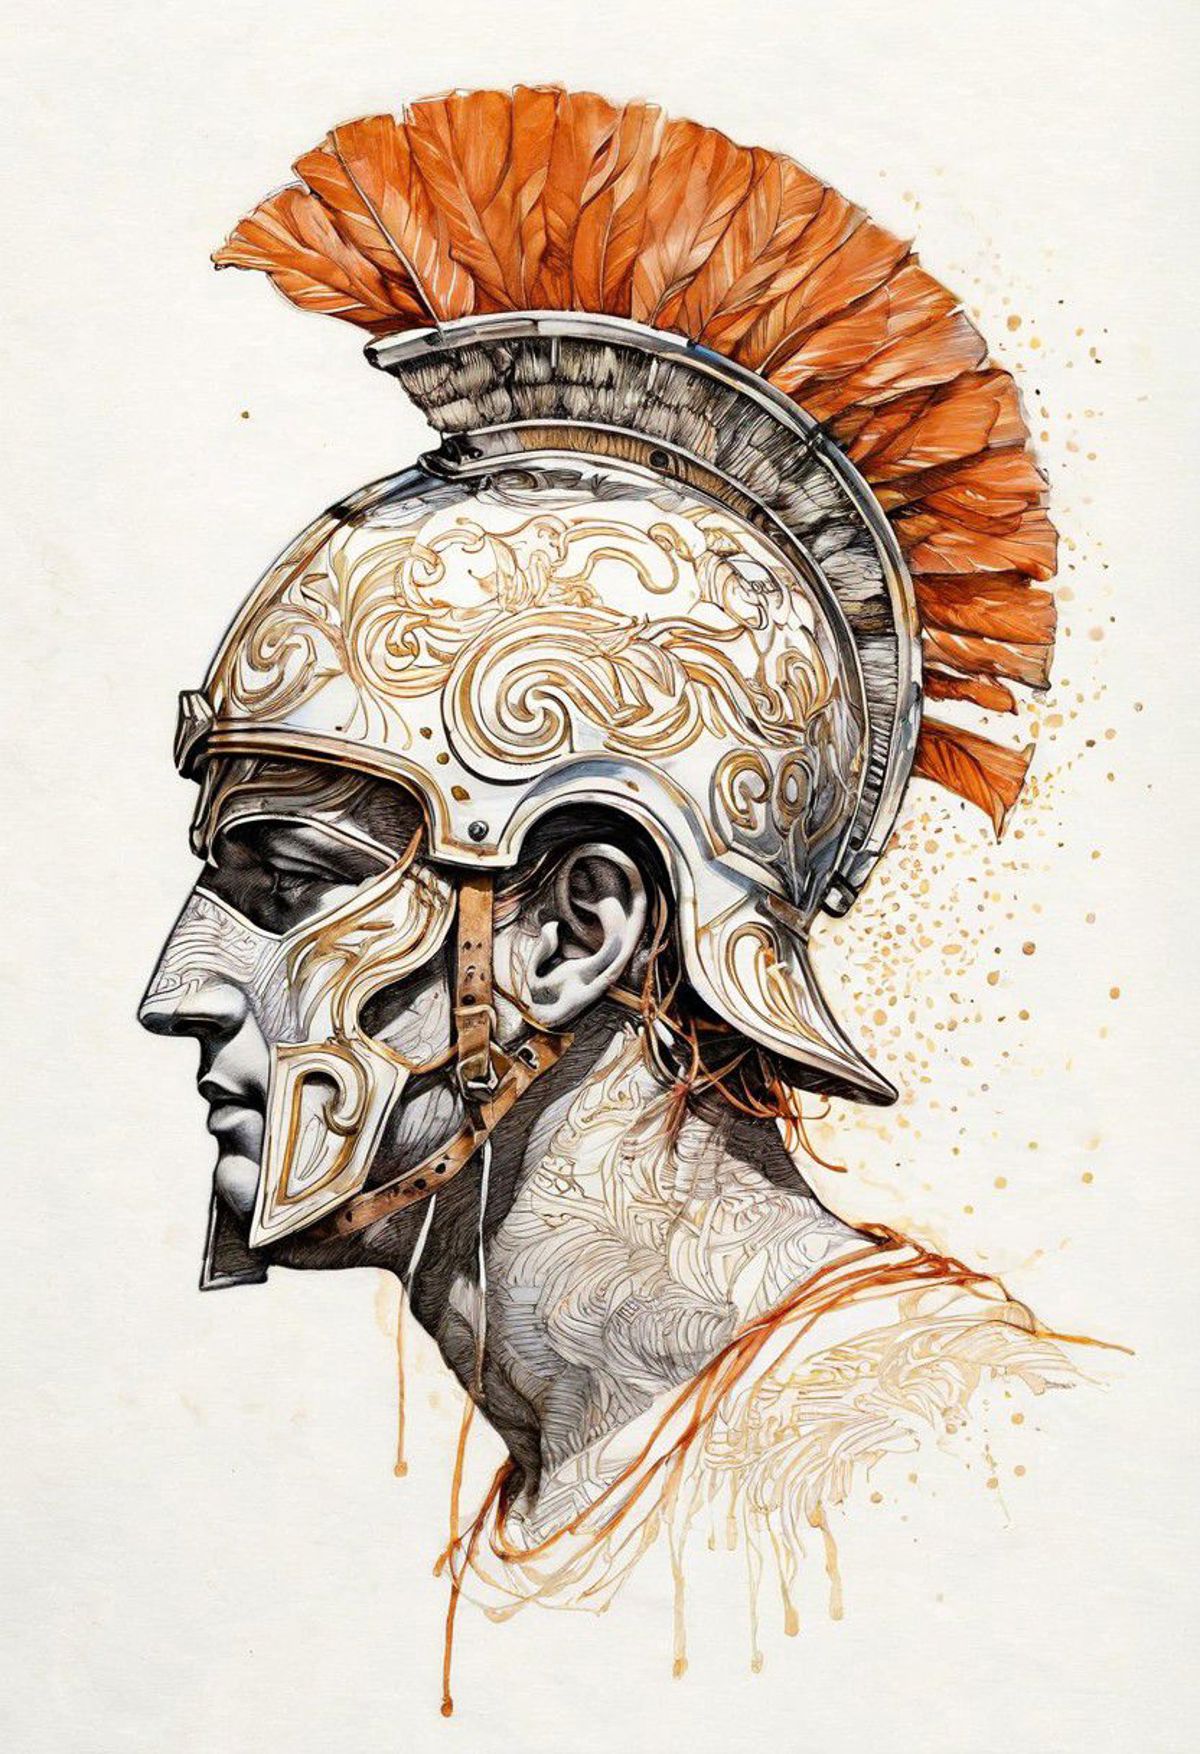 A close-up of a man wearing a gold and orange warrior helmet, possibly a Roman warrior.